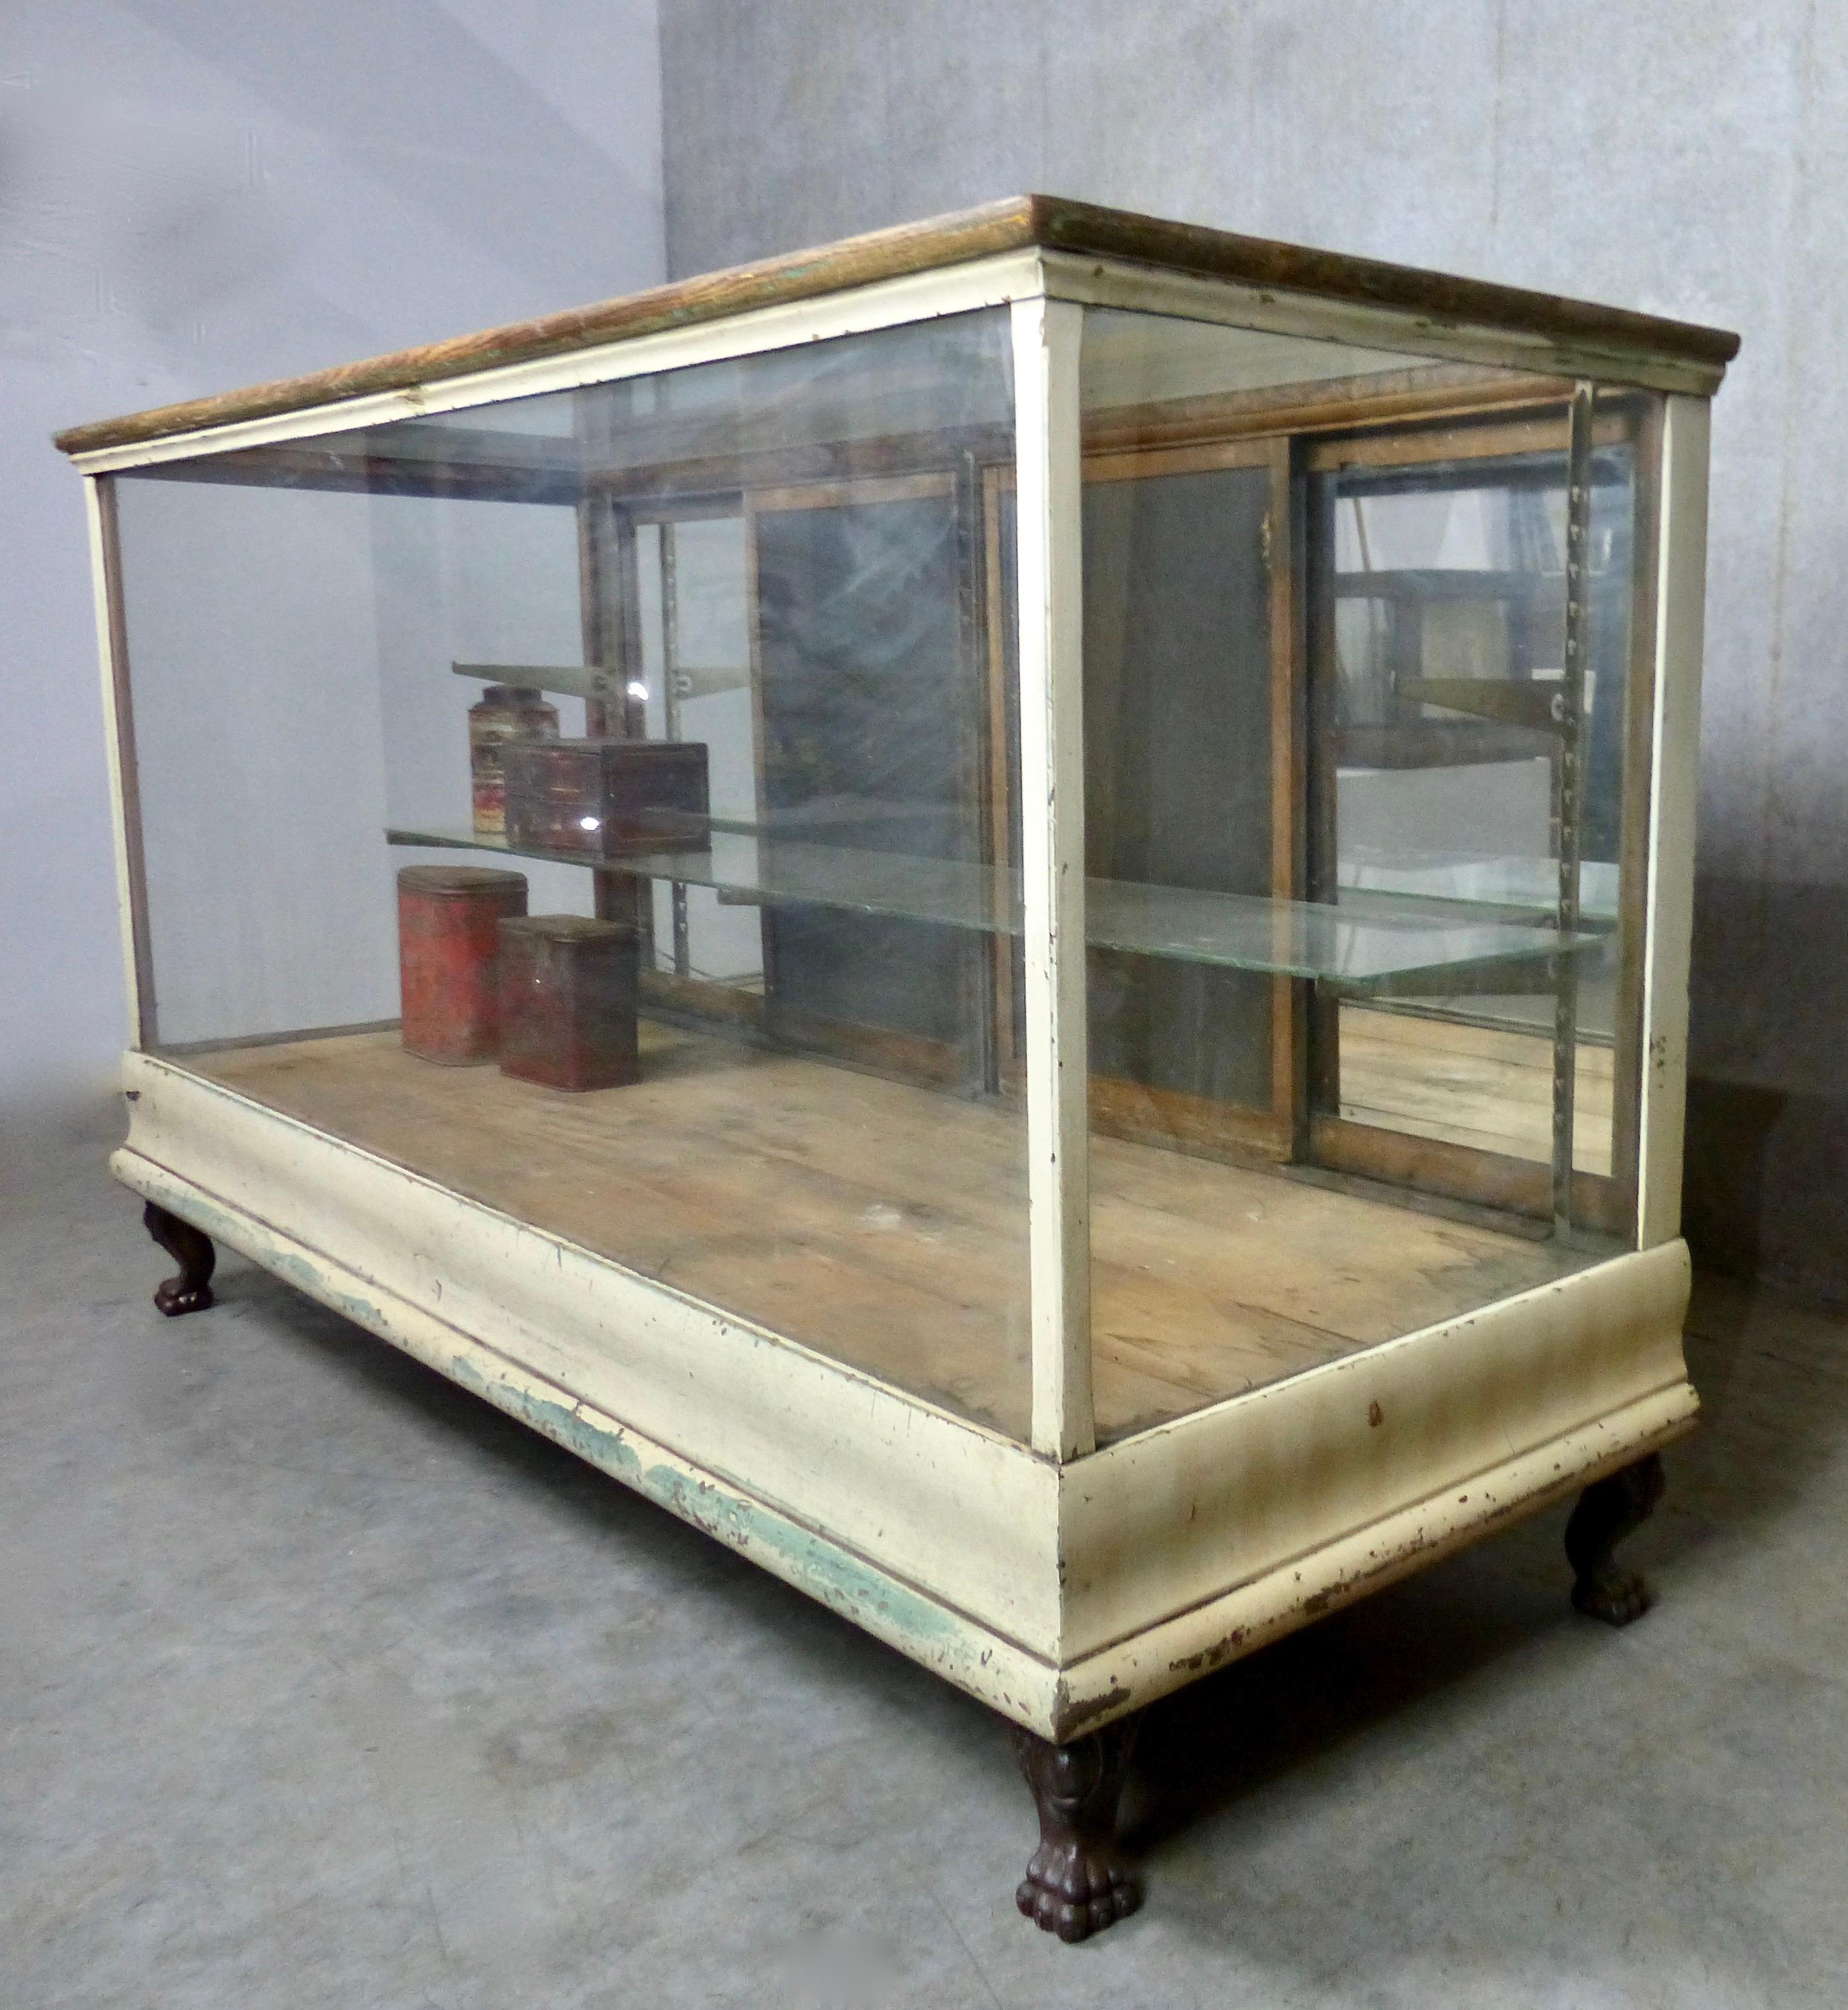 An antique mercantile cabinet elevated on cast copper feet. The cabinet features glass on three sides with some mirror on the rear sliding doors. The glass countertop (with beveled edges) has been beautifully aged over the past 100 years by eager